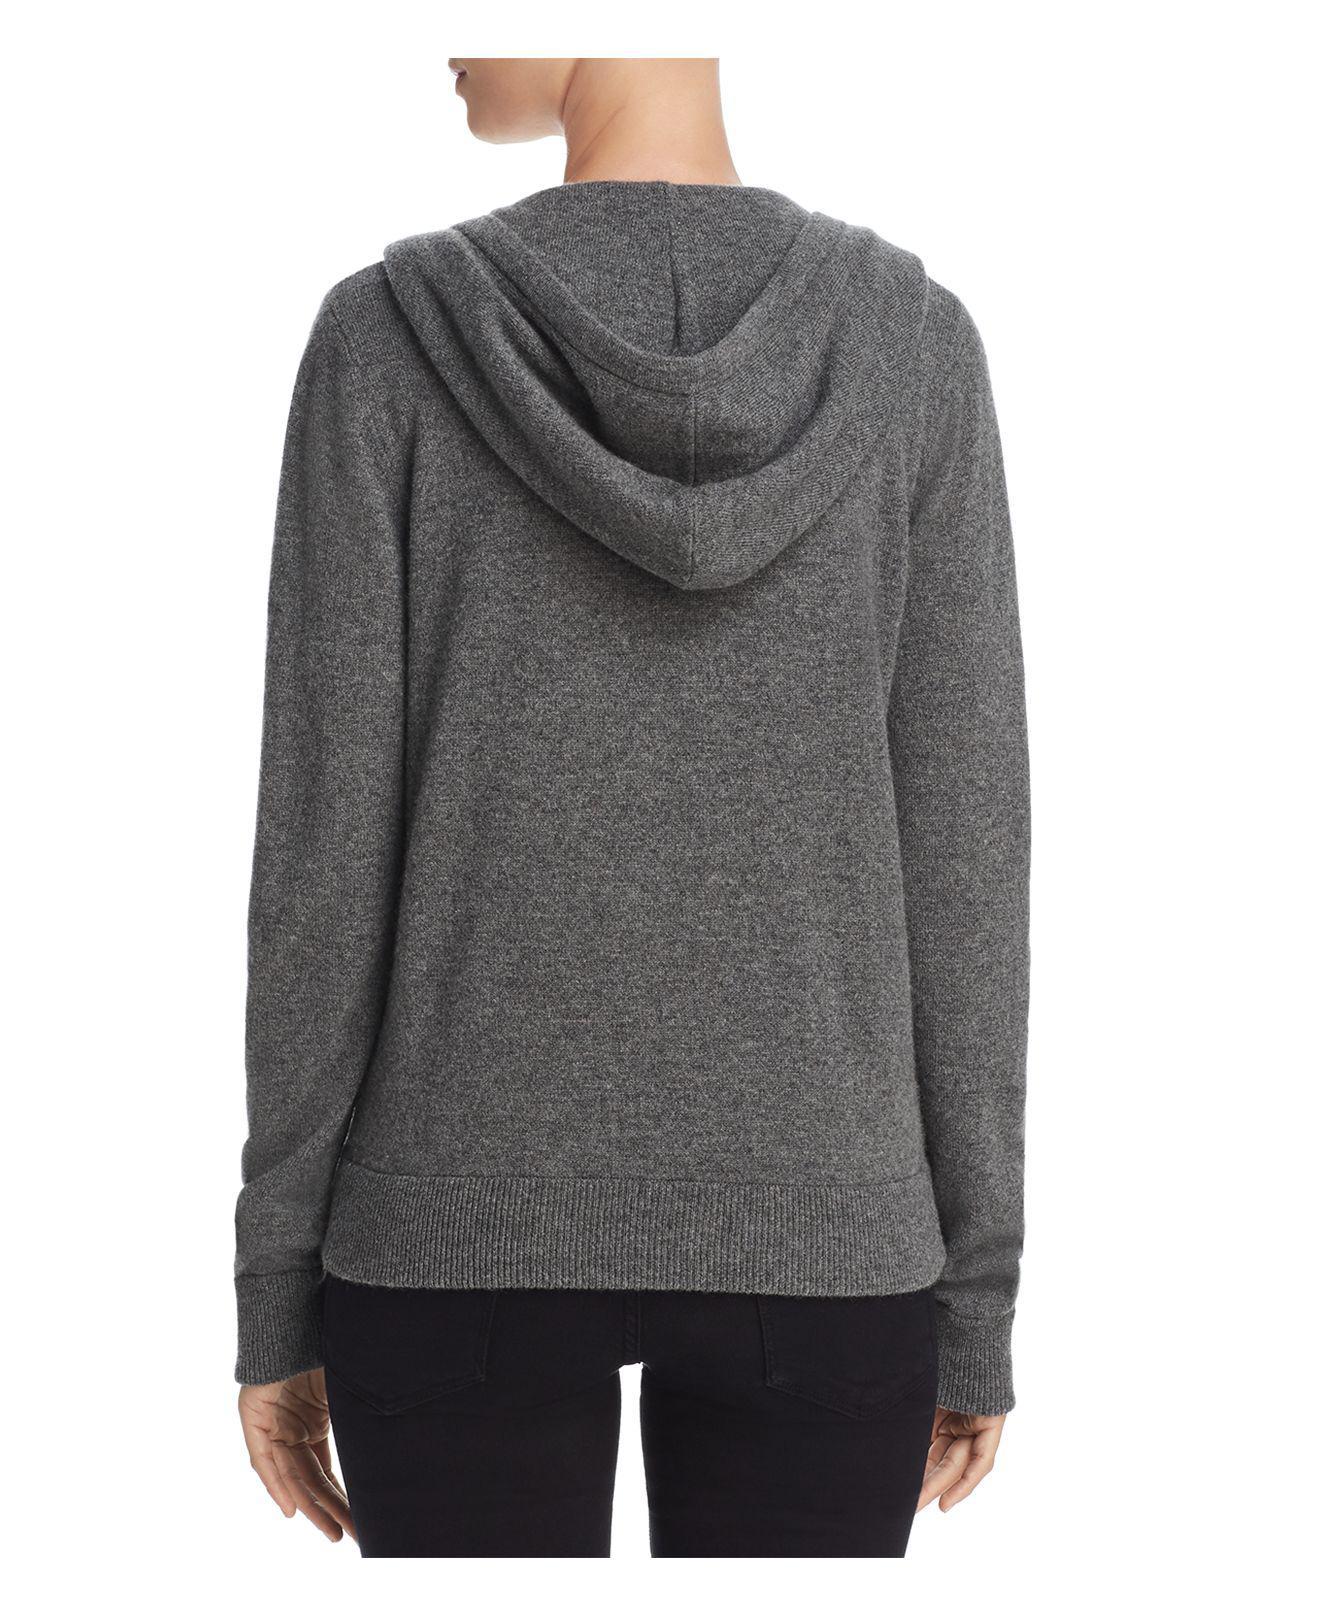 Juicy Couture Robertson Cashmere Hoodie in Gray - Lyst